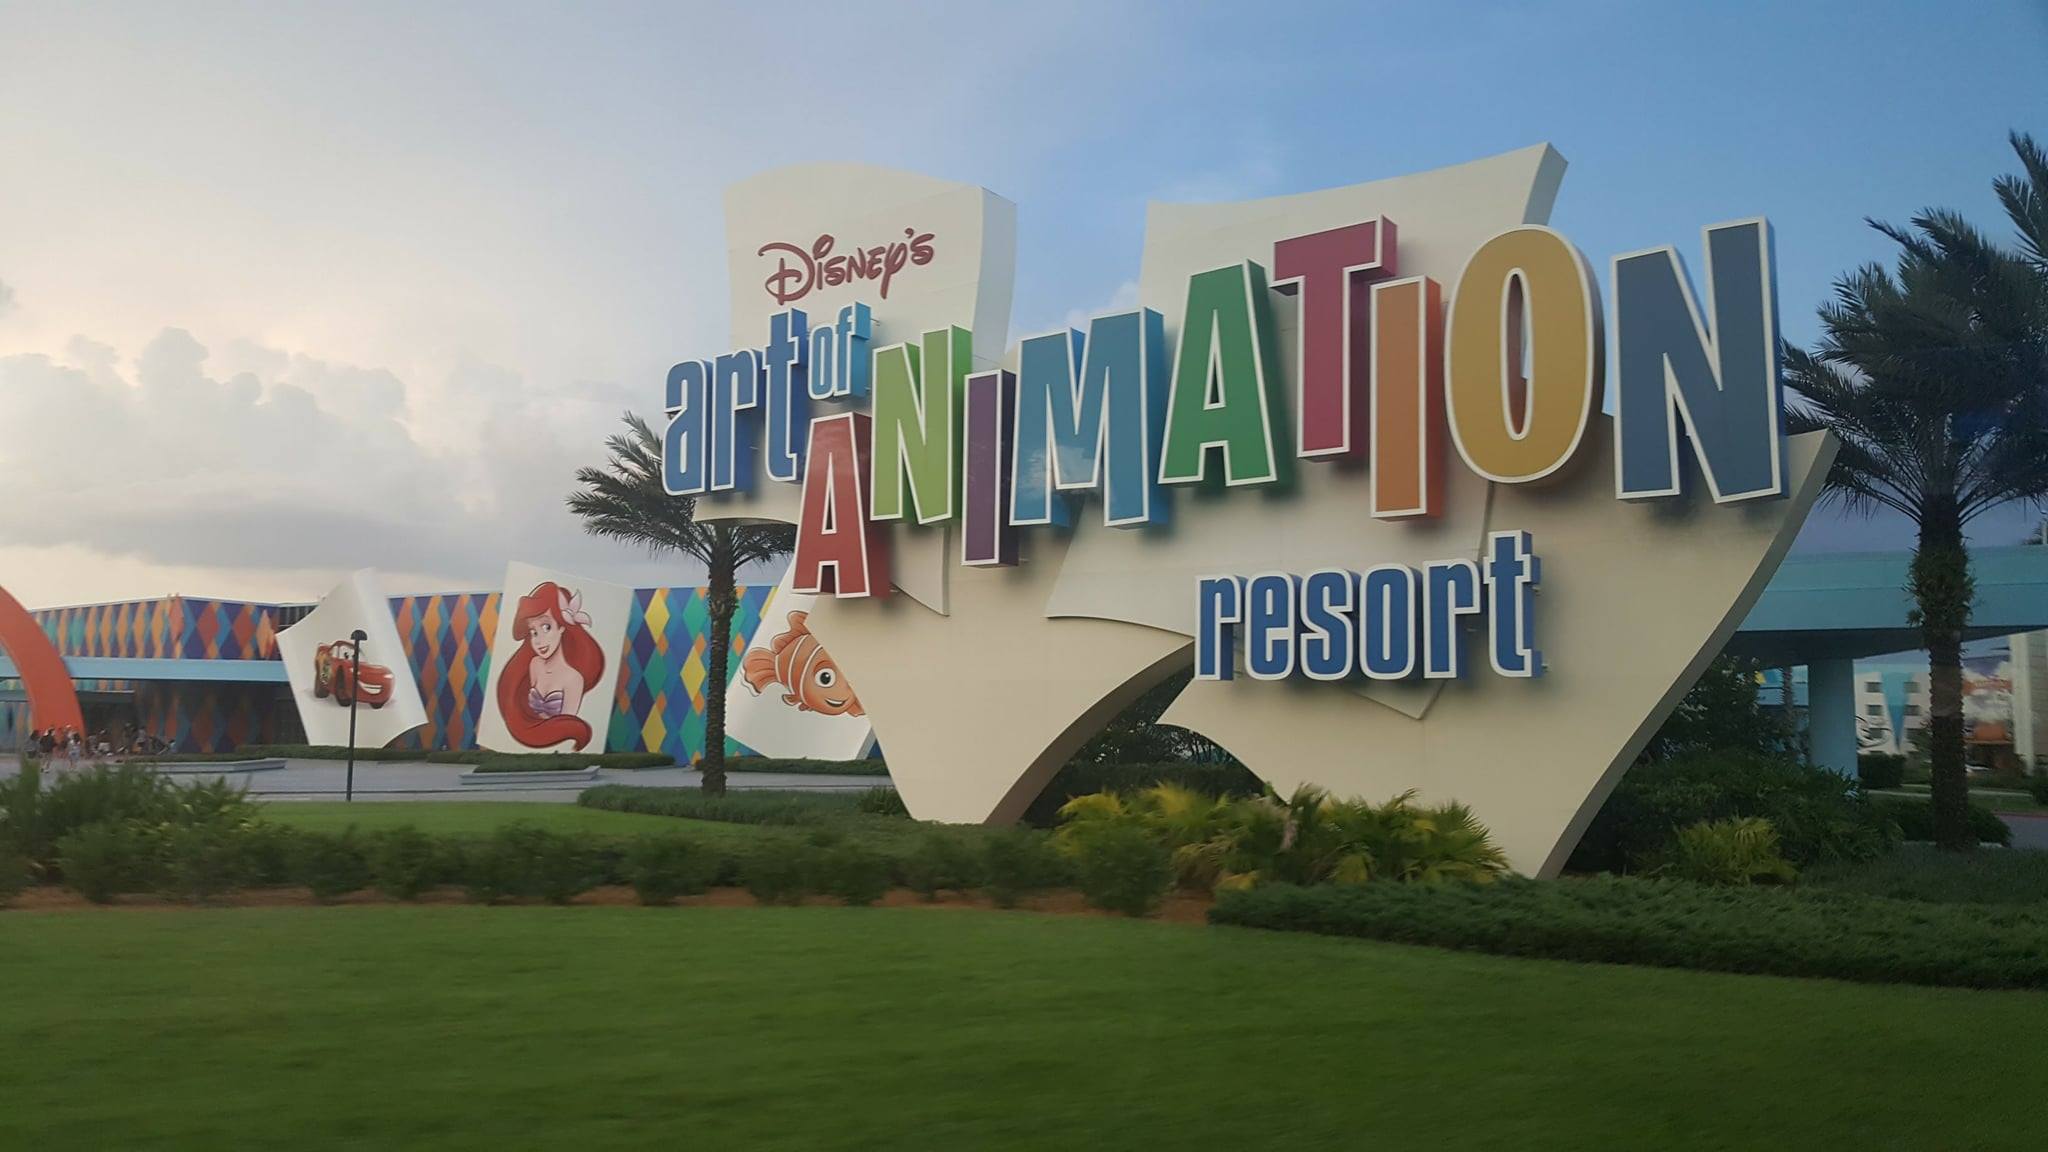 5 Year Old Air Lifted To Hospital After Drowning Scare At Art of Animation